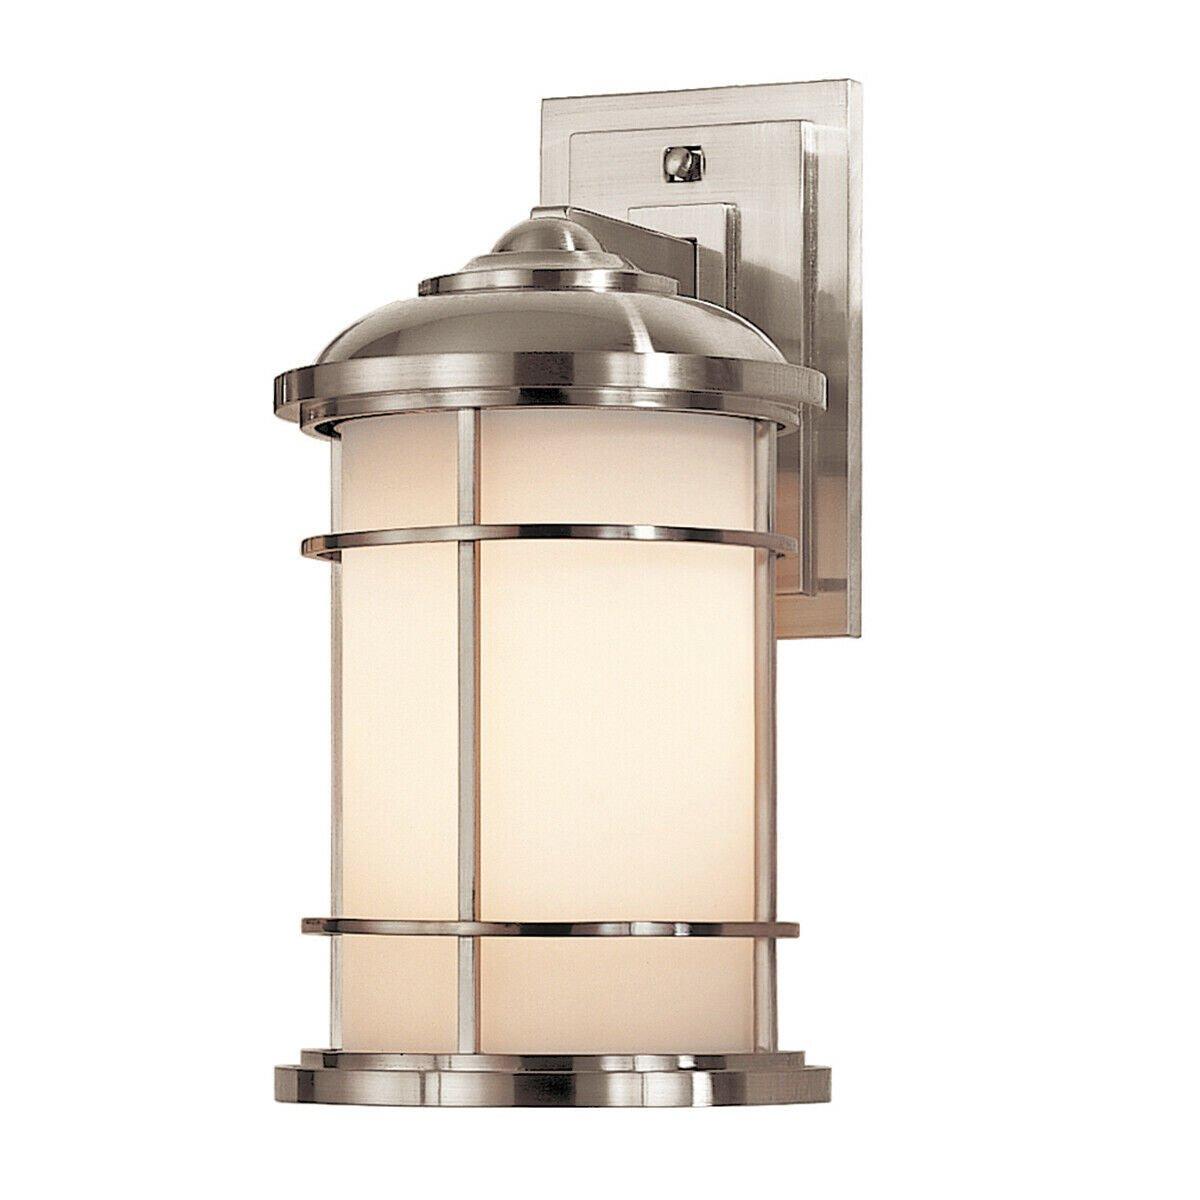 Outdoor IP44 Wall Light Sconce Brushed Steel LED E27 60W Bulb External d00821